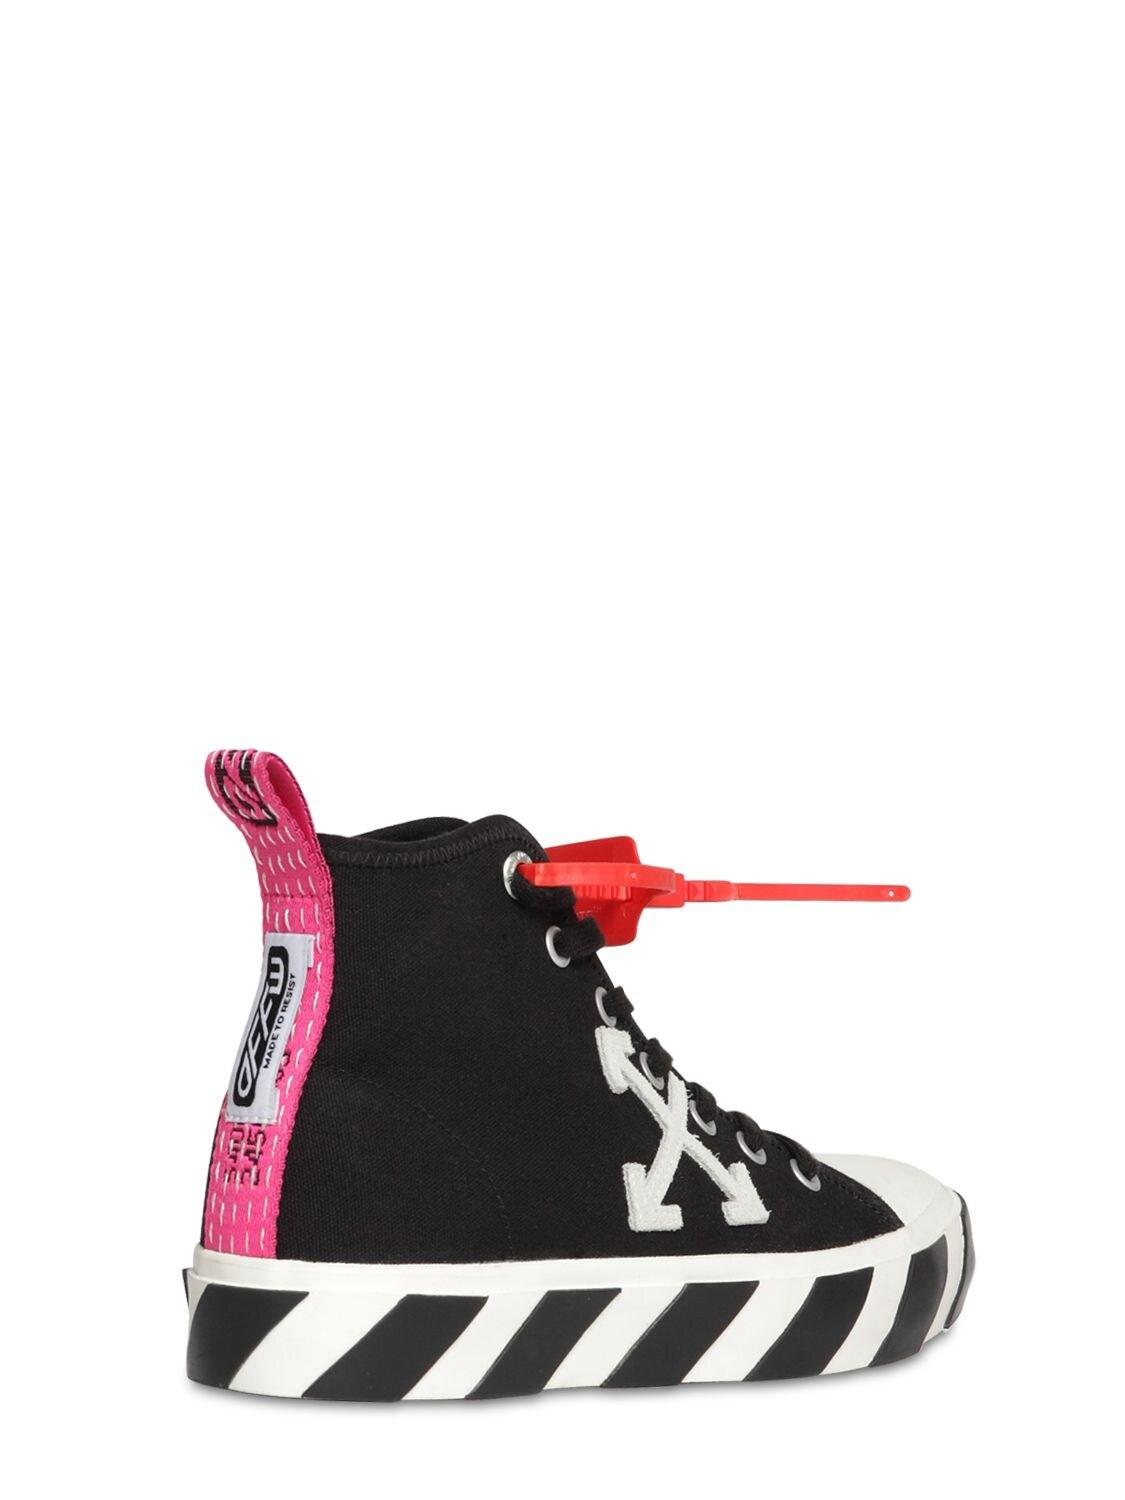 Off-White c/o Virgil Abloh High Top Canvas Shoes in Black for Men 